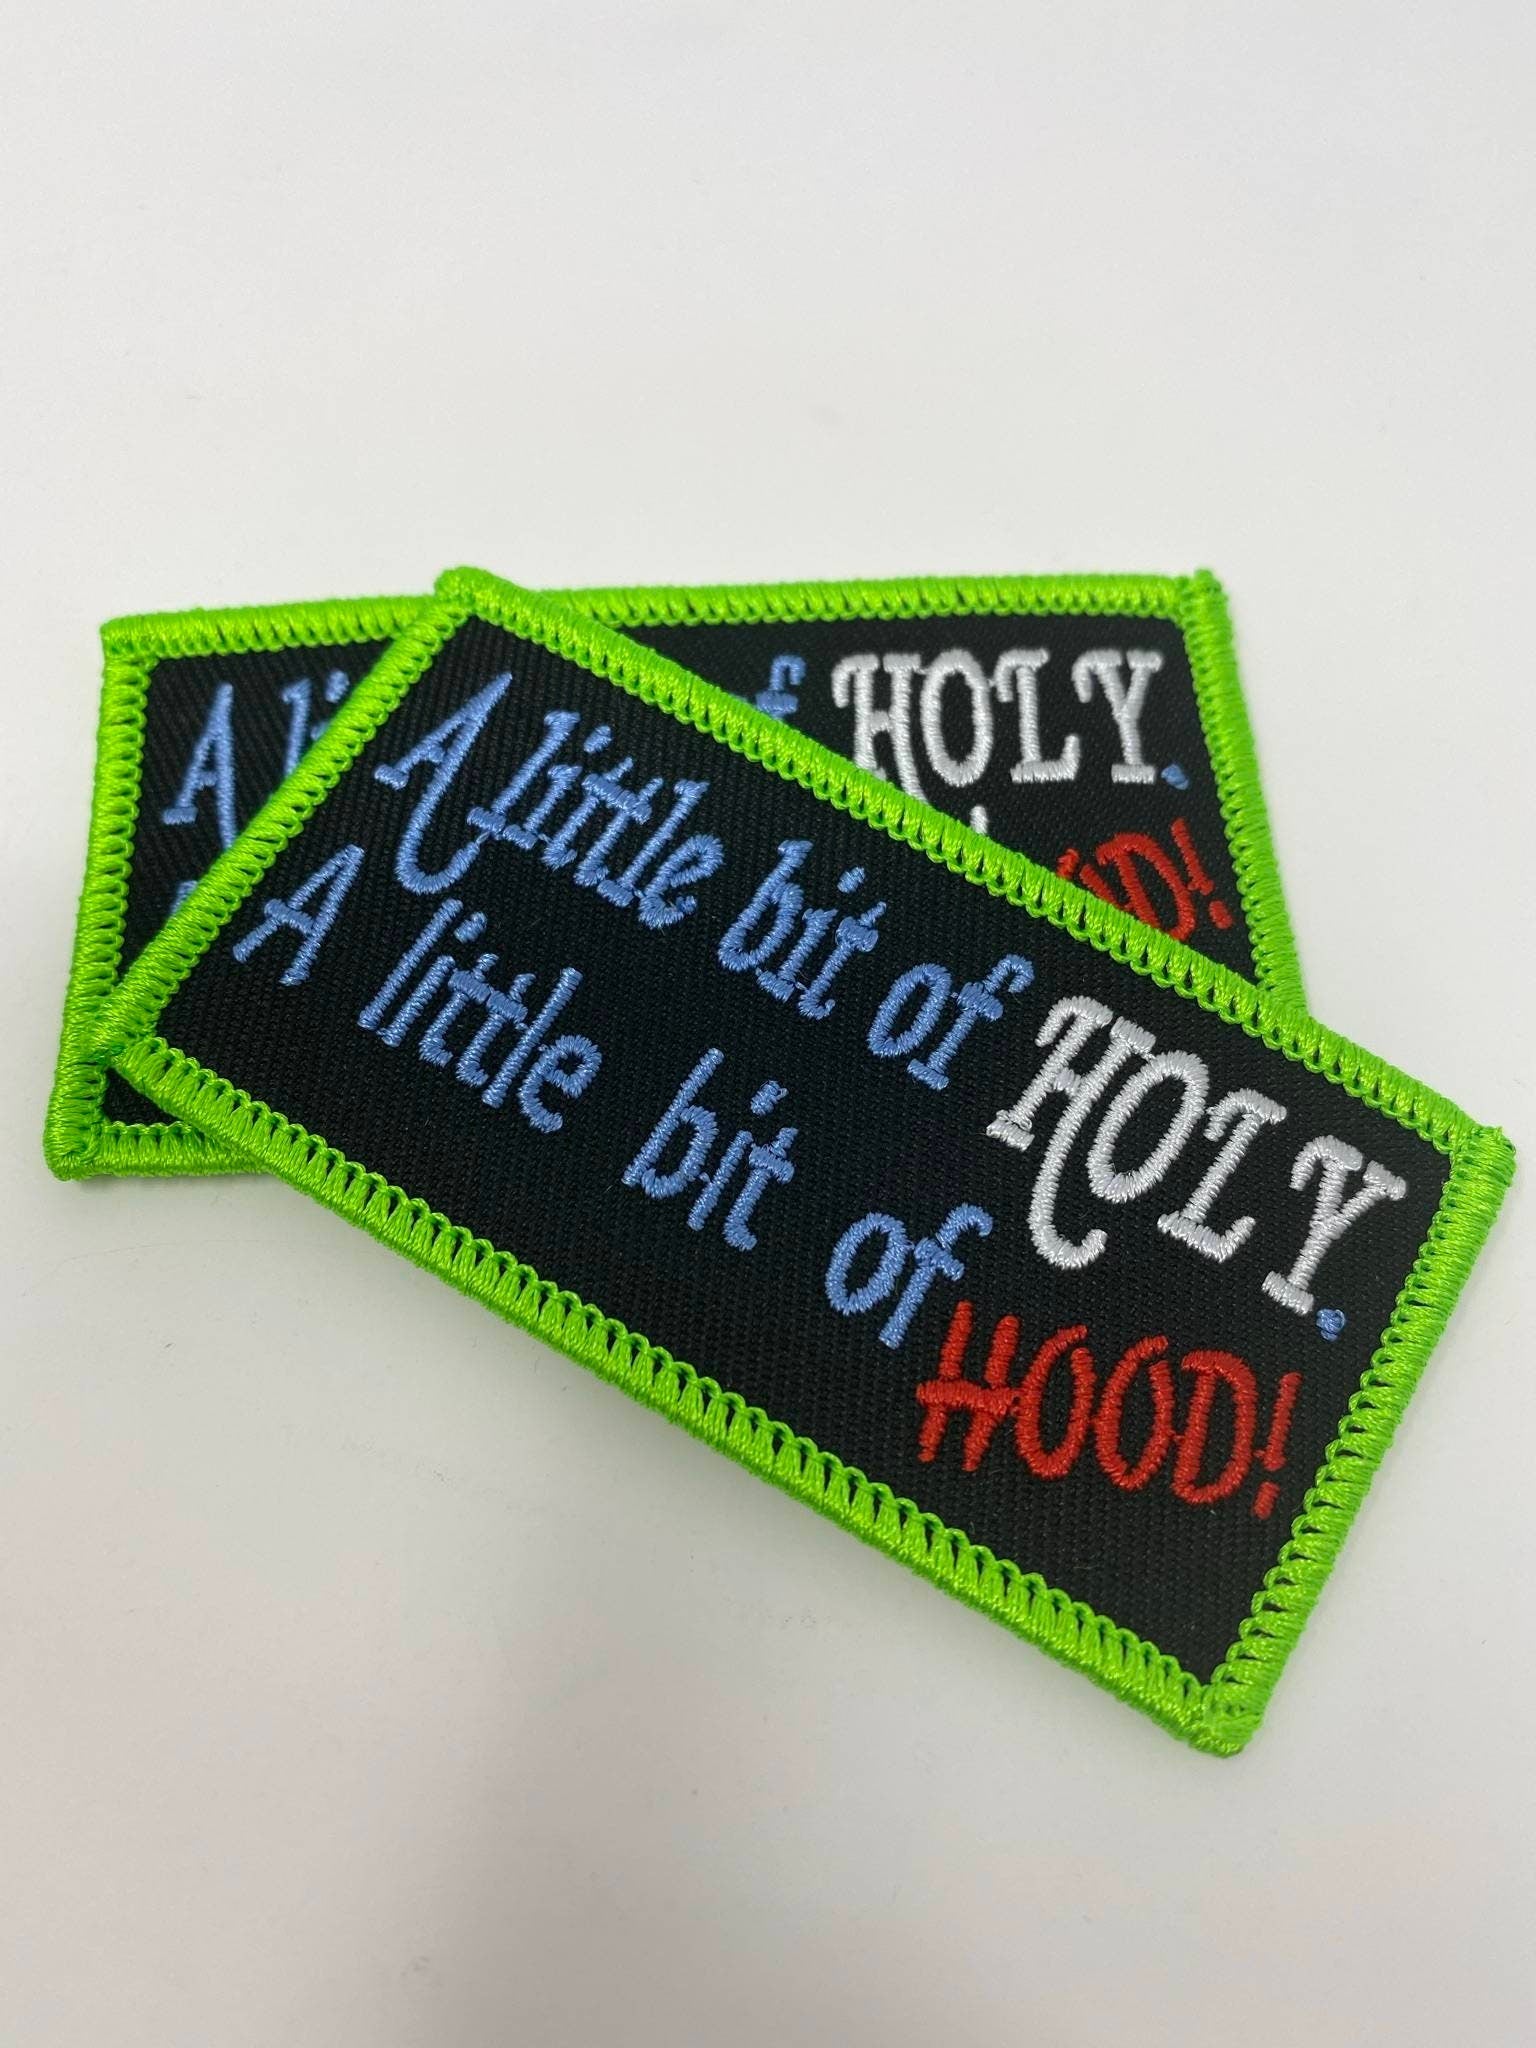 New, "A Little Bit of Holy, A Little Bit of Hood" Iron-on Embroidered Patch, Size 3", Funny Patch for Clothing, DIY Applique, Small Patch